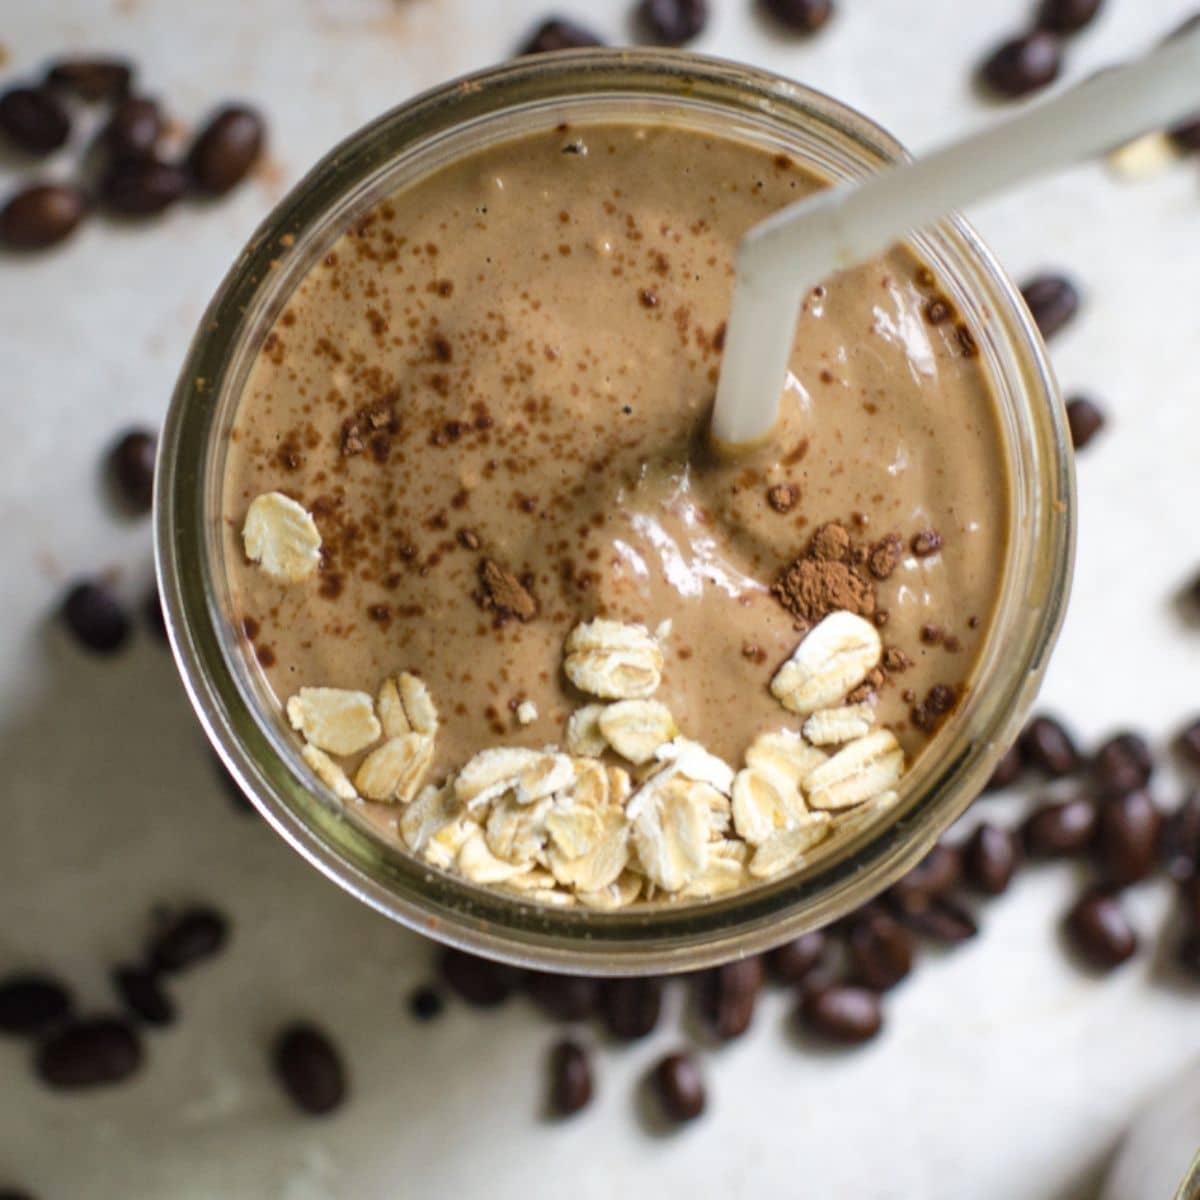 https://www.foodabovegold.com/wp-content/uploads/2020/10/Featured-Hero_-Coffee-Smoothie.jpg